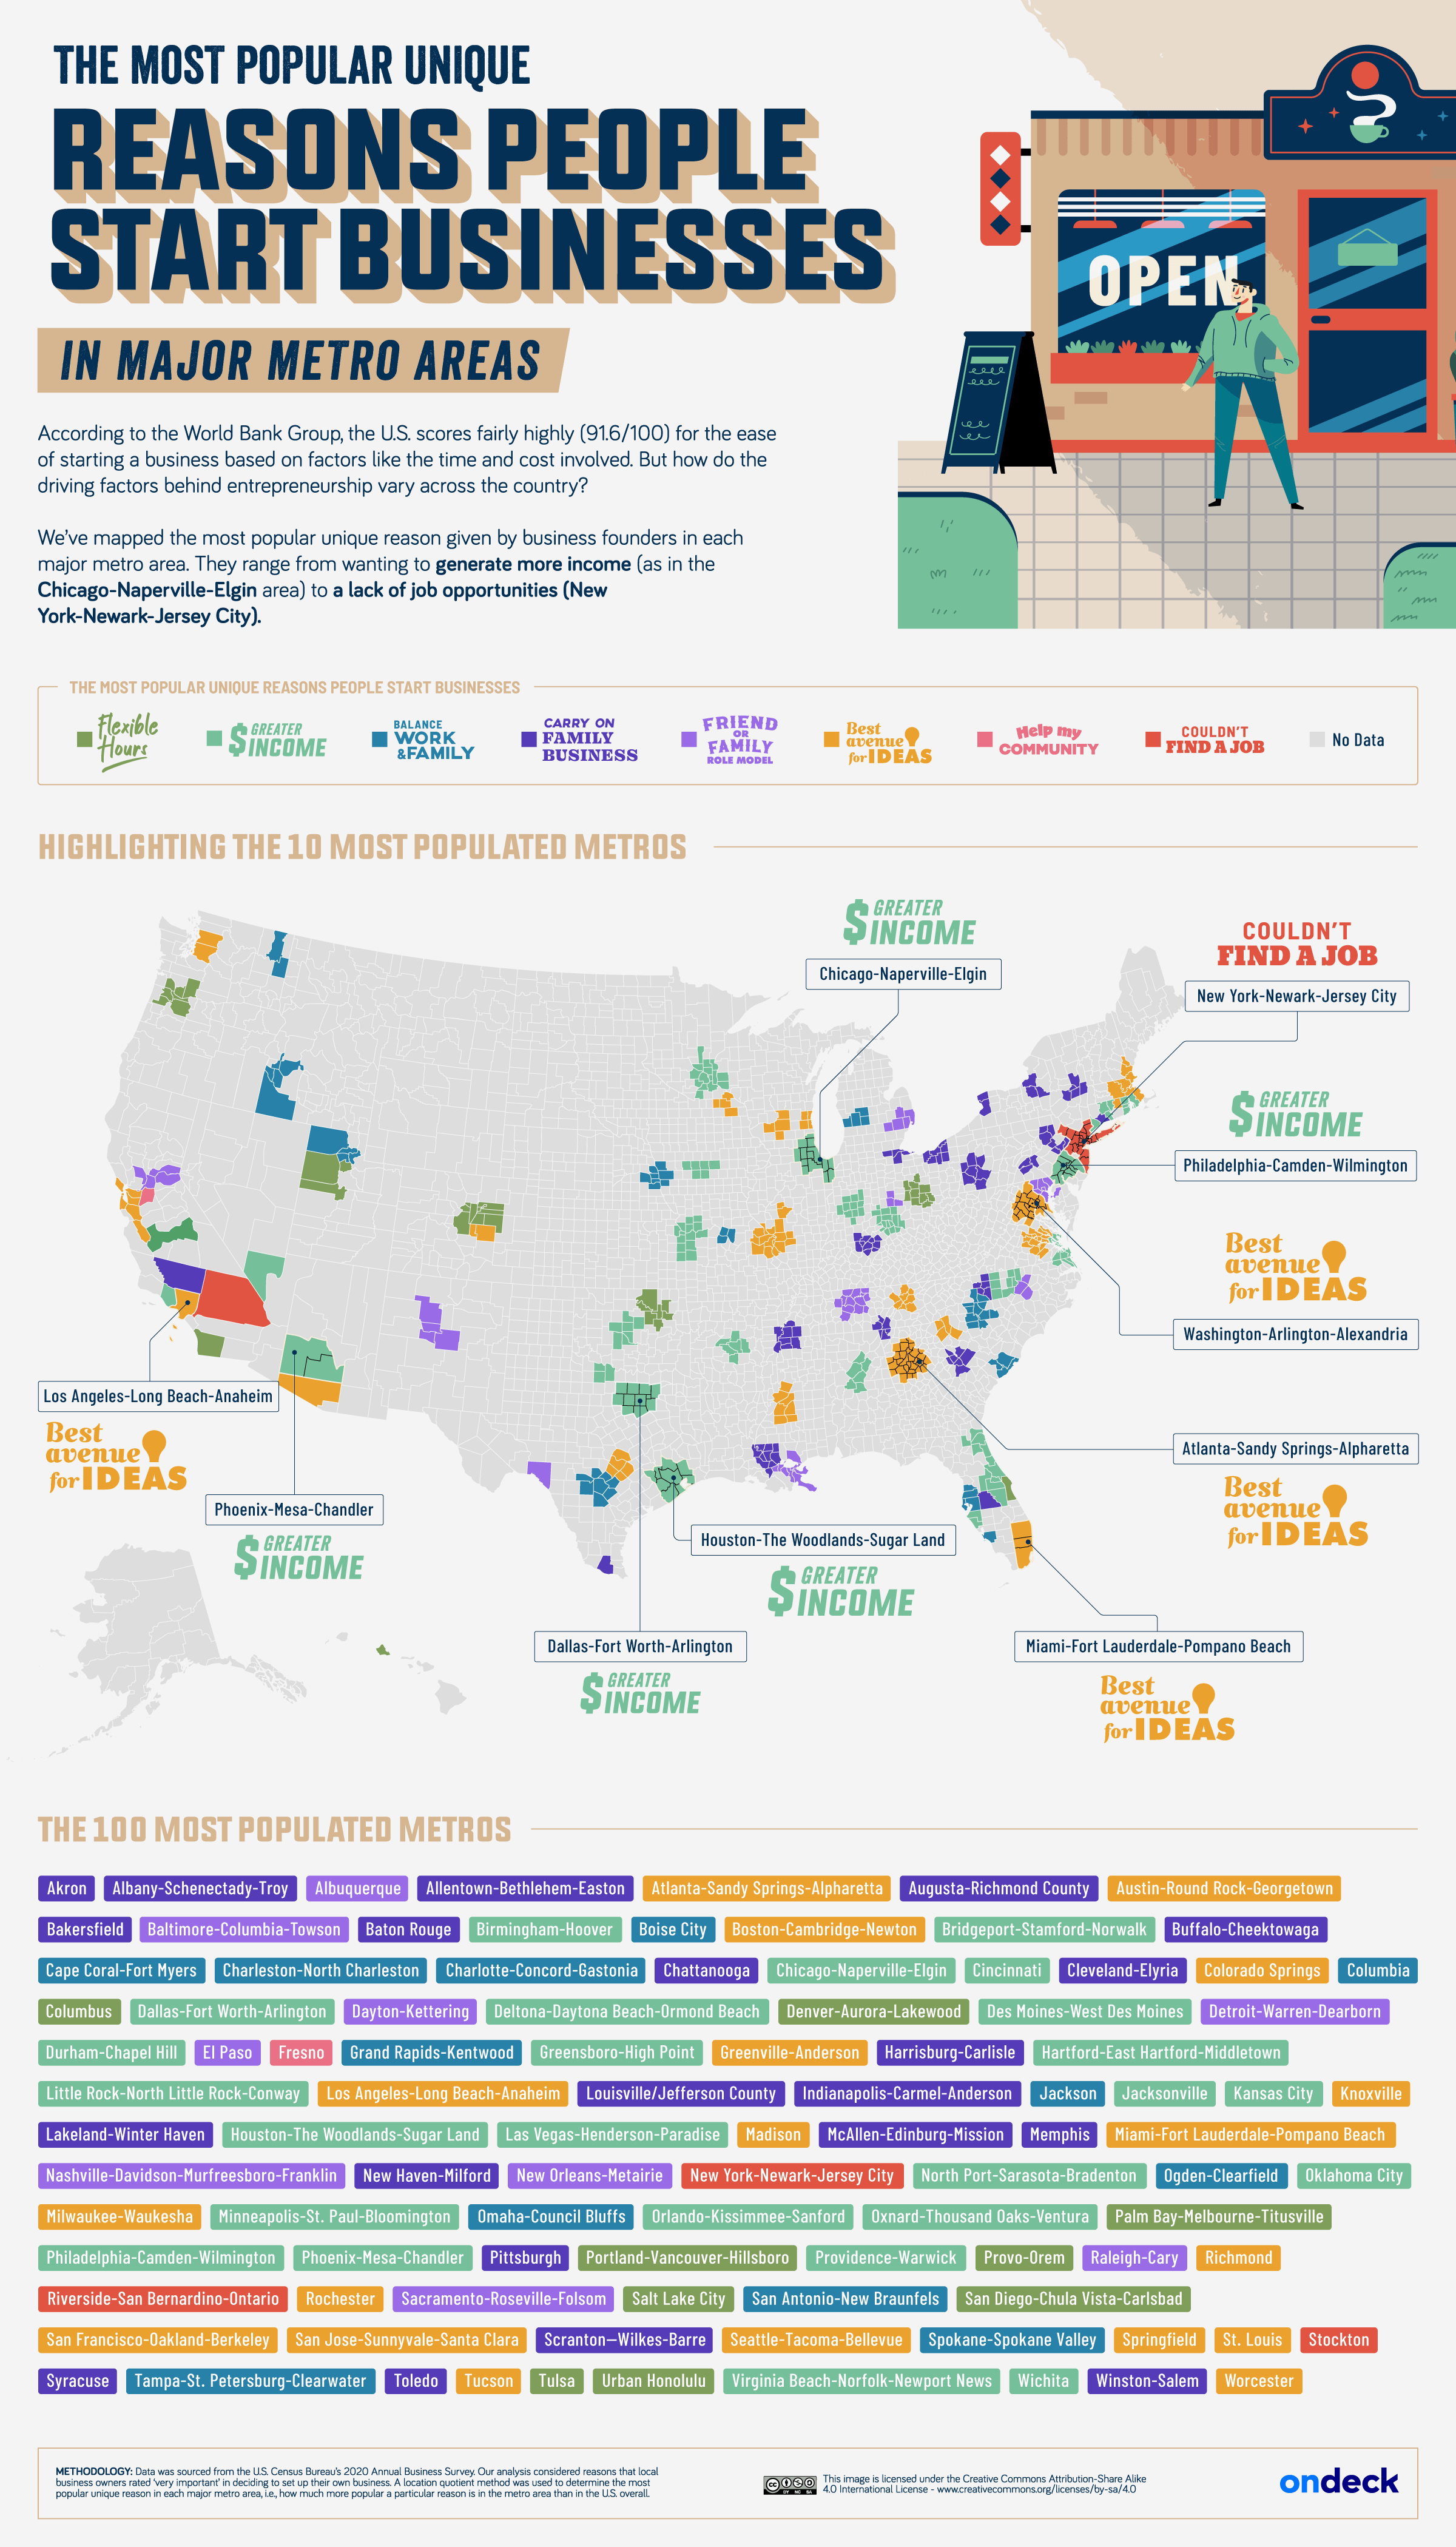 Reasons people start businesses in different metro areas map